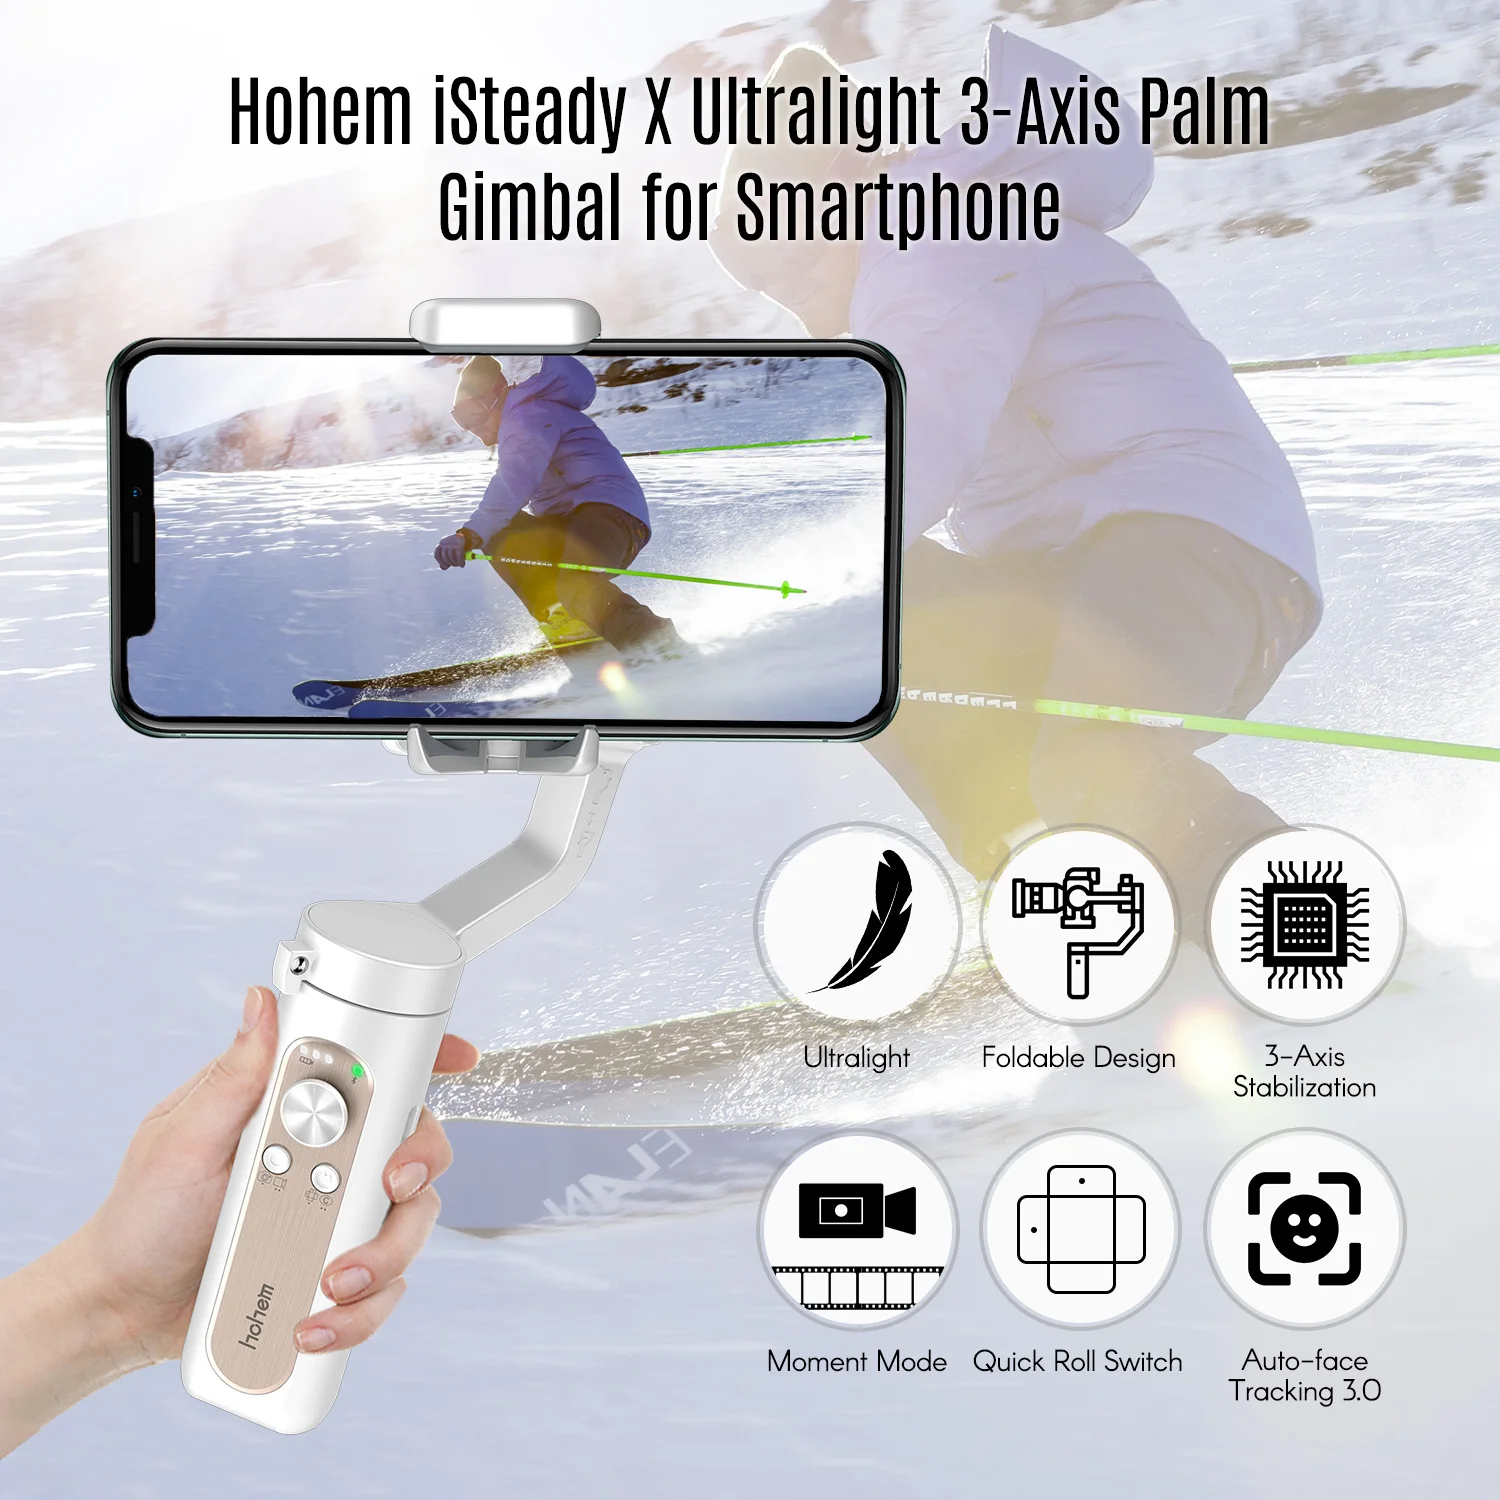 Hohem iSteady X Ultralight 3-Axis Palm Gimbal Handheld Stabilizer Foldable Design One-Click Inception Mode with Moment Mode ISteady 3.0 Anti-Shake Algorithm System Compatible with Smartphone 